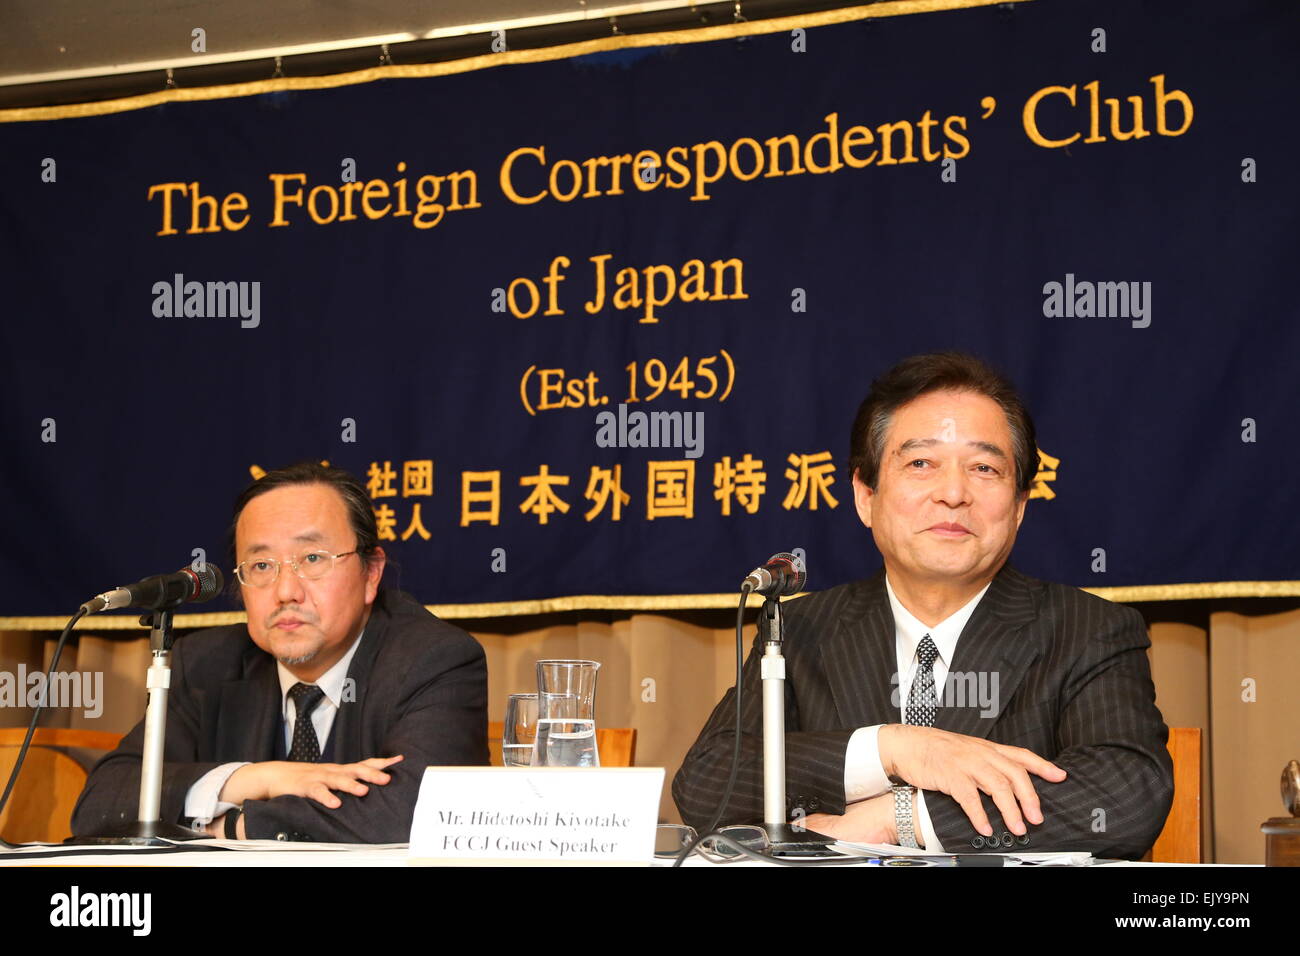 Hidetoshi Kiyotake and Minoru Tanaka launch the FCCJ Freedom of the Press Awards at the Foreign Correspondant's Club of Japan on April 2nd, 2015 in Tokyo. Journalists Kiyotake and Tanaka attend an event at Tokyo's FCCJ to explain why they are launching the FCCJ Freedom of Press Awards this year. According to the two investigative journalists freedom of the press in Japan is under threat. In 2010 Reporters Without Borders ranked Japan 11th out of 80 countries in its World Press Freedom Index, but in February 2015 Japan was ranked 61st. One reason for this is the new state secrets law introduced Stock Photo